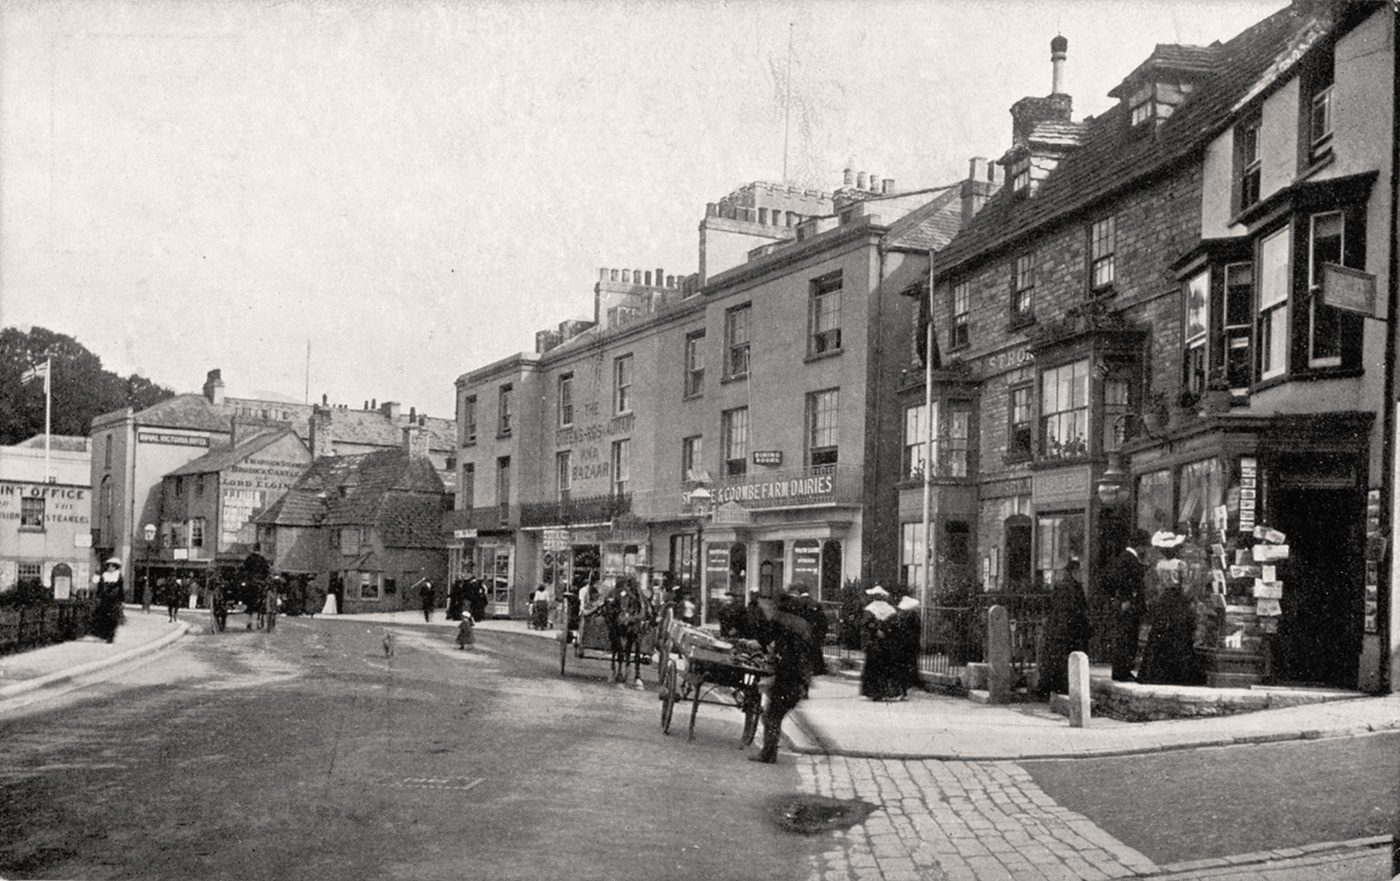 Swanage lower High Street in the late 1800s